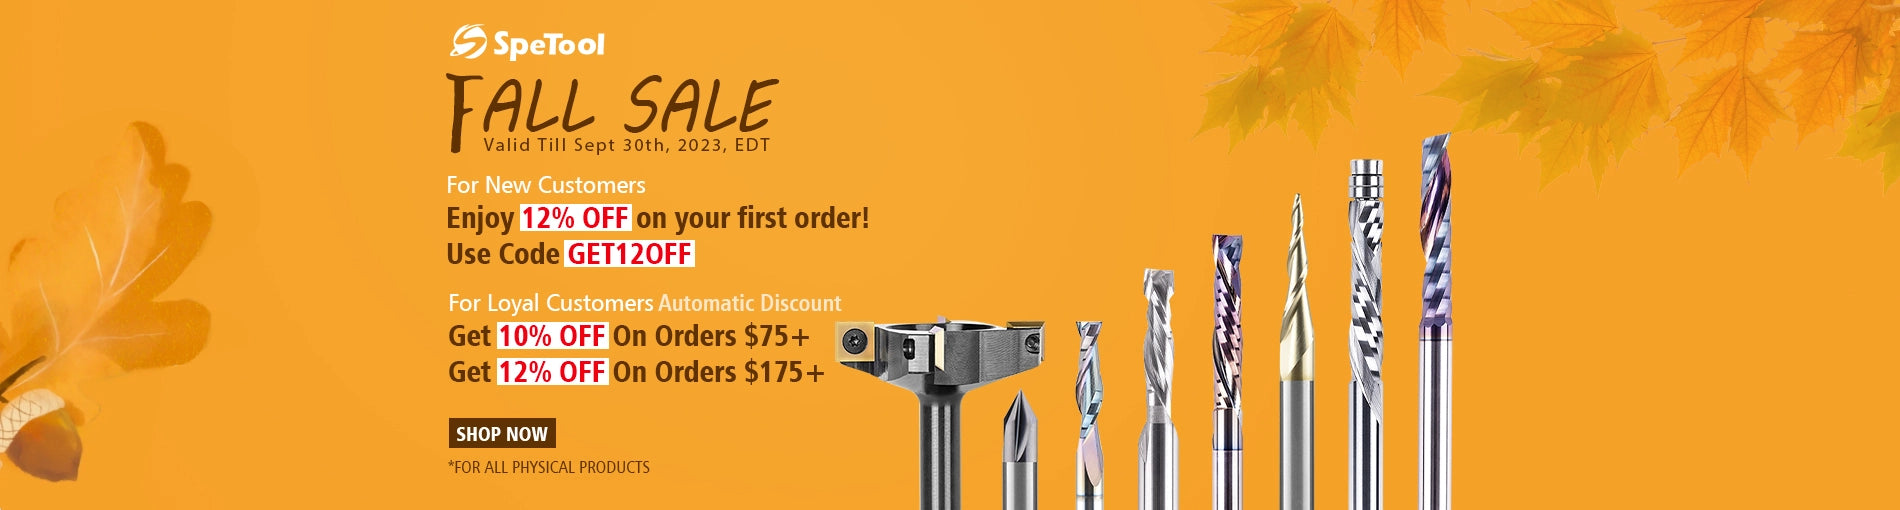 SpeTool Router Bits Fall Sale 2023